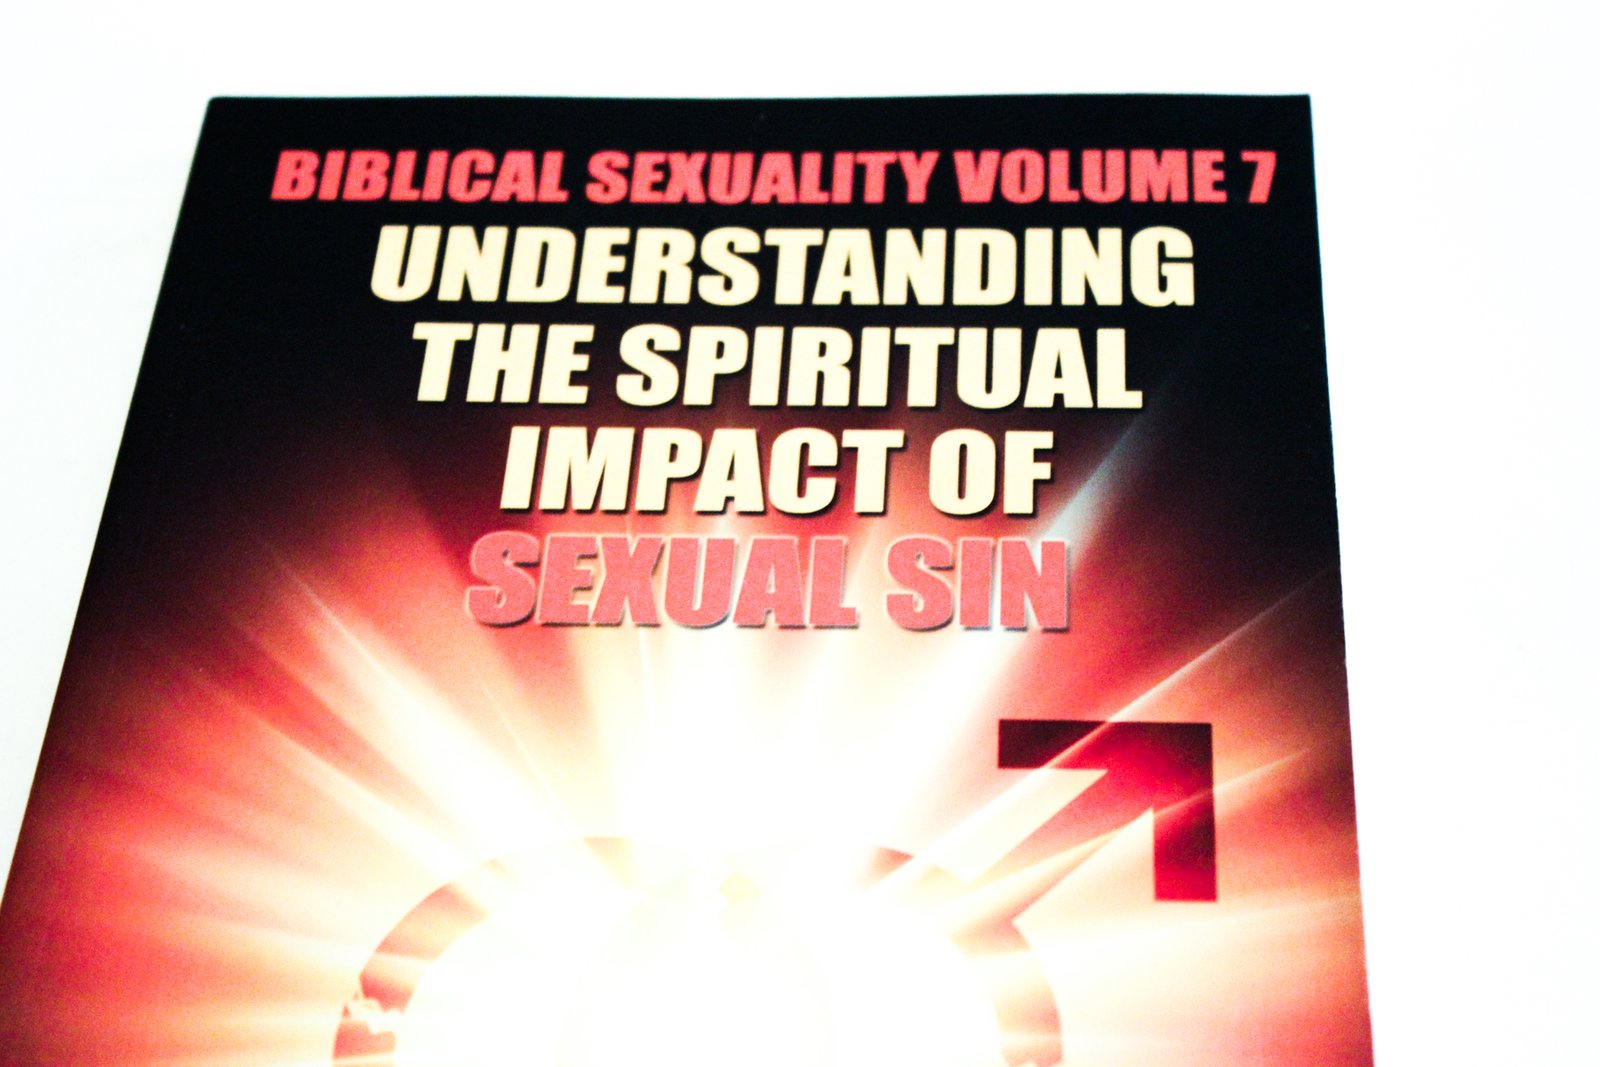 Biblical Sexuality Volume 7 Understanding The Spiritual Impact Of Sexual Sin Purity Press Books 